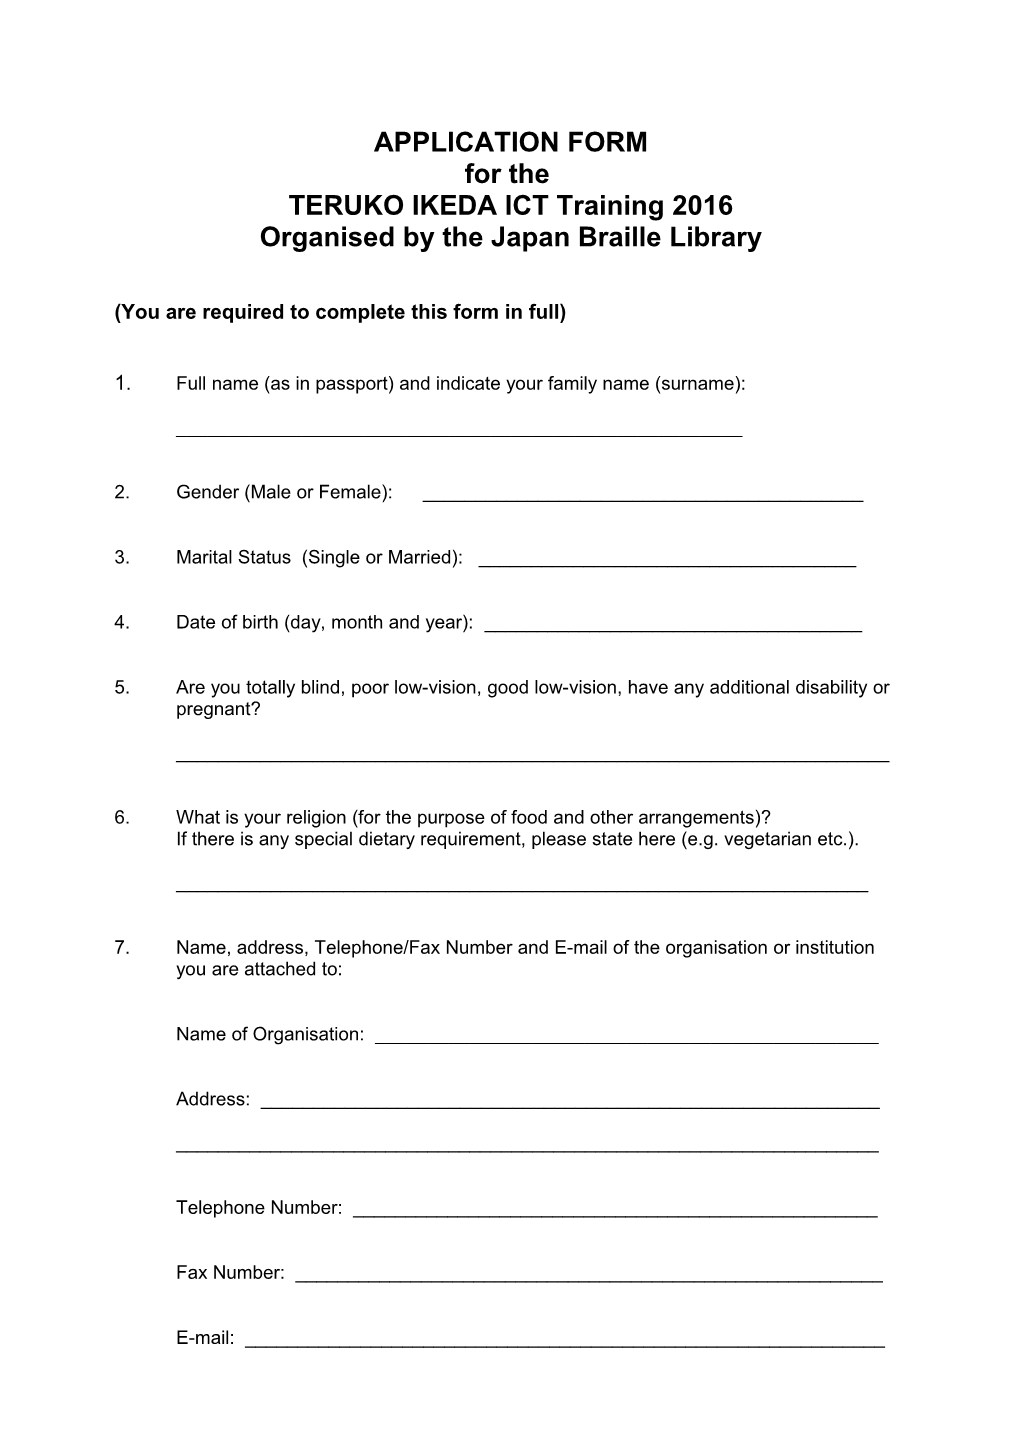 Application Form for the 4Th Wbuap Teruko Ikeda Ict Scholarship (2007)